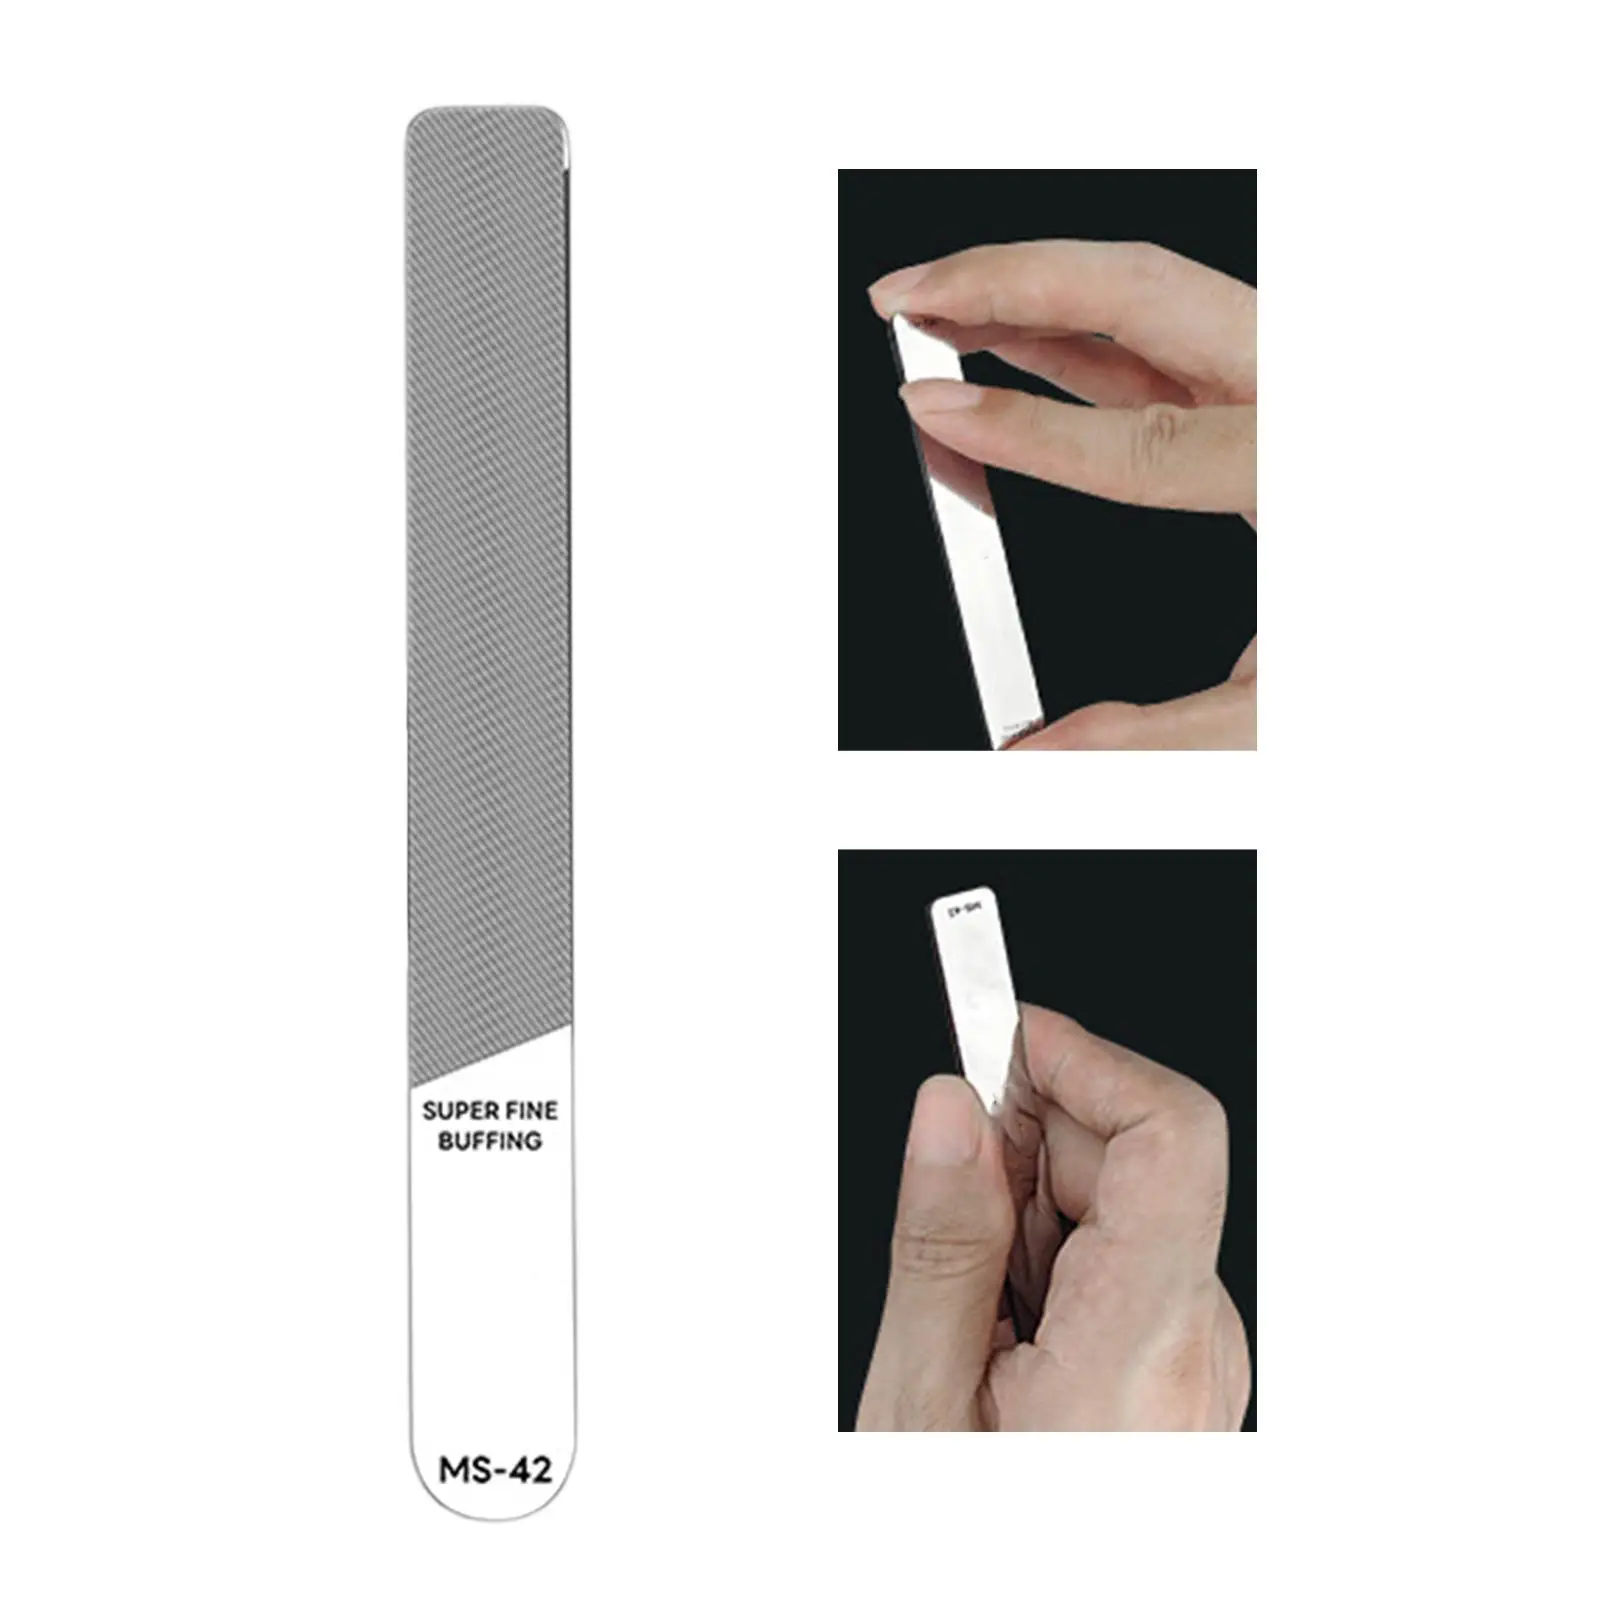 Glass File for Models Precision Rustproof Engraving File Grinding Tool for Figure Plane Car Toy Resin Material Art Work Model